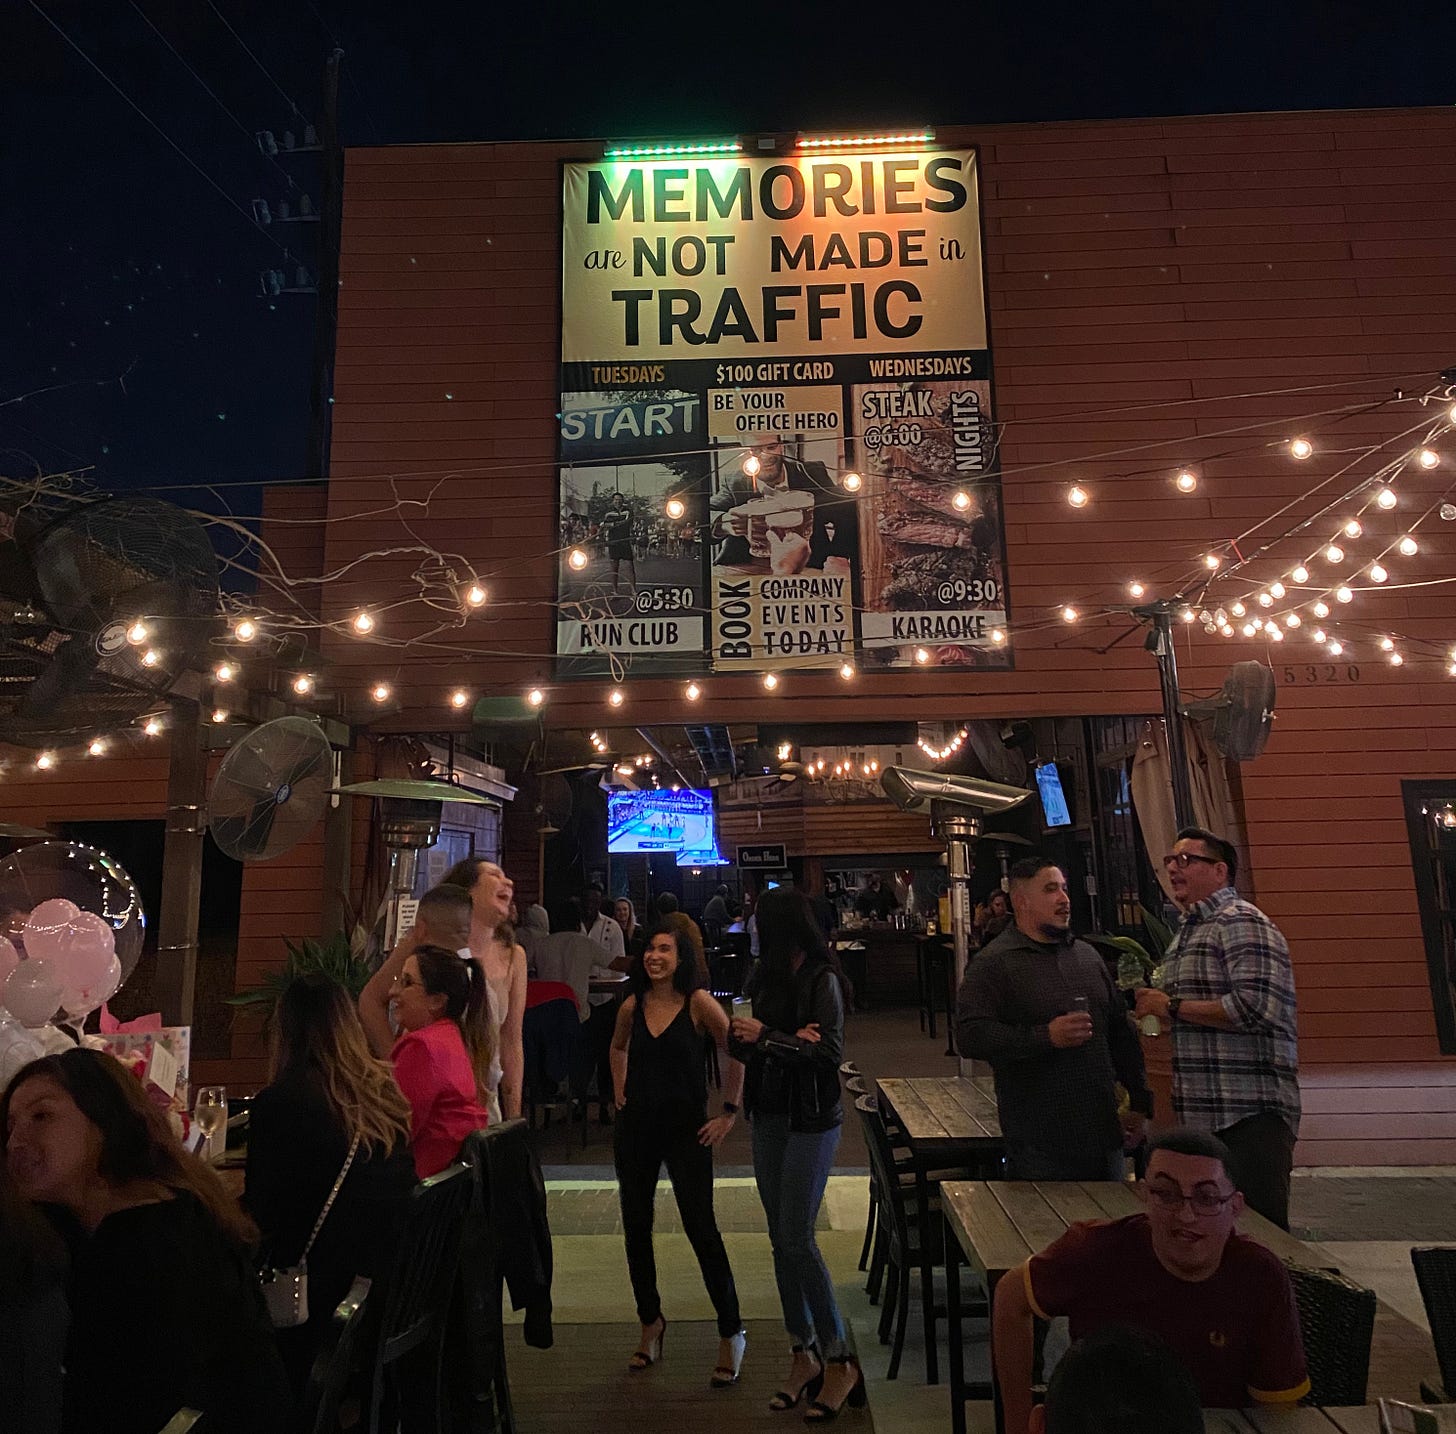 People partying at a bar in Houston, Texas, underneath a sign that says "Memories are not made in traffic."